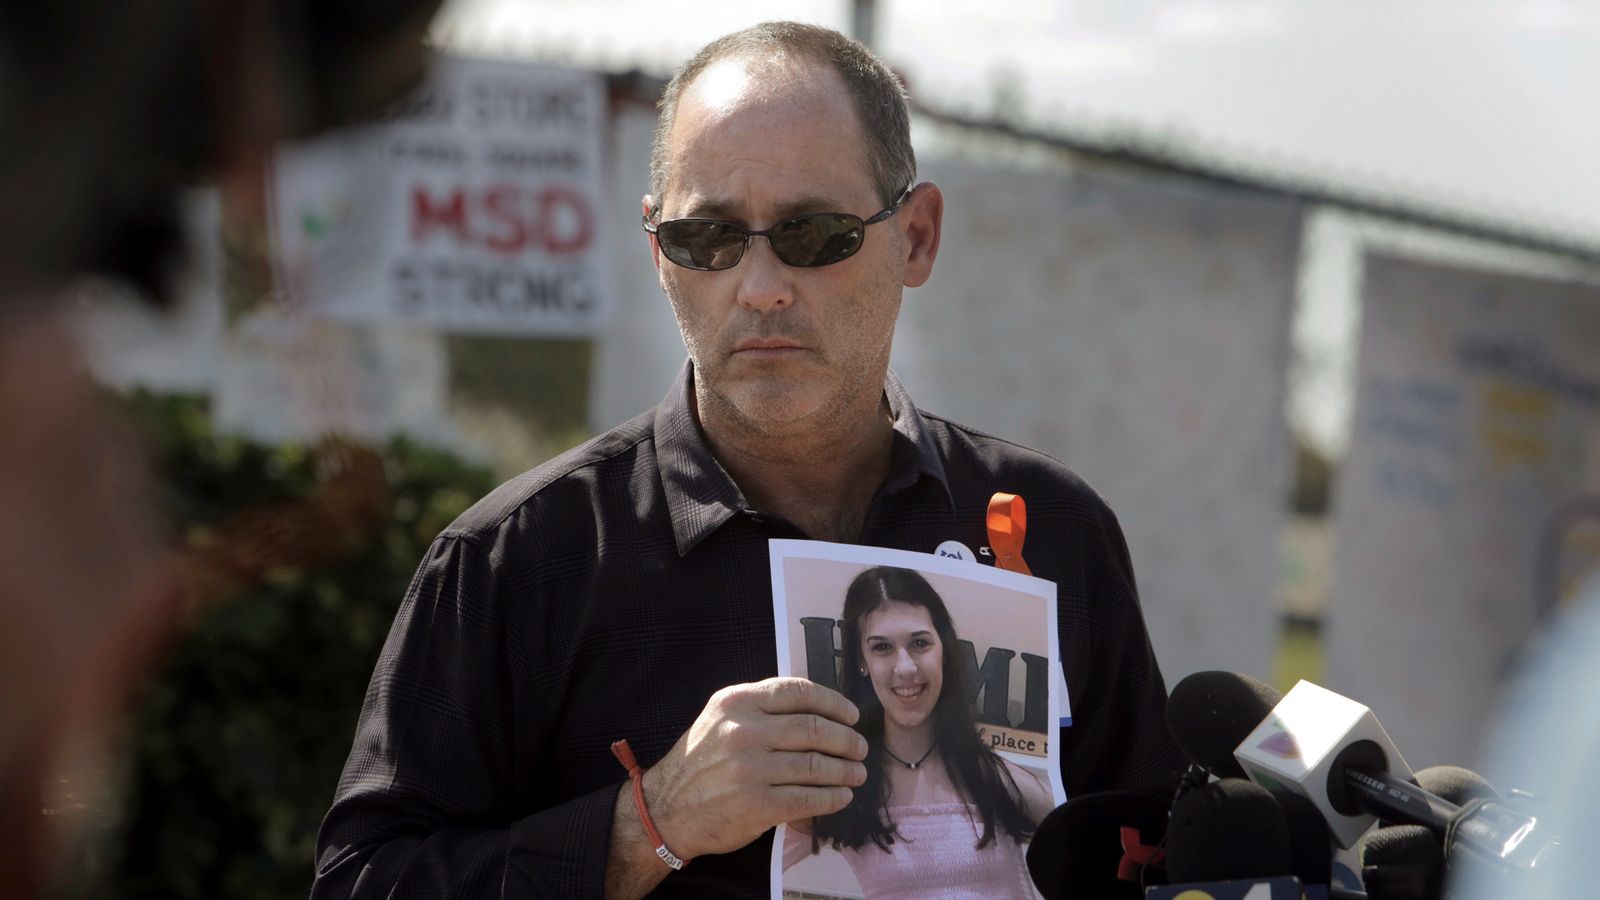 Man jailed for sending more than 200 abusive messages to father of Parkland school shooting victim